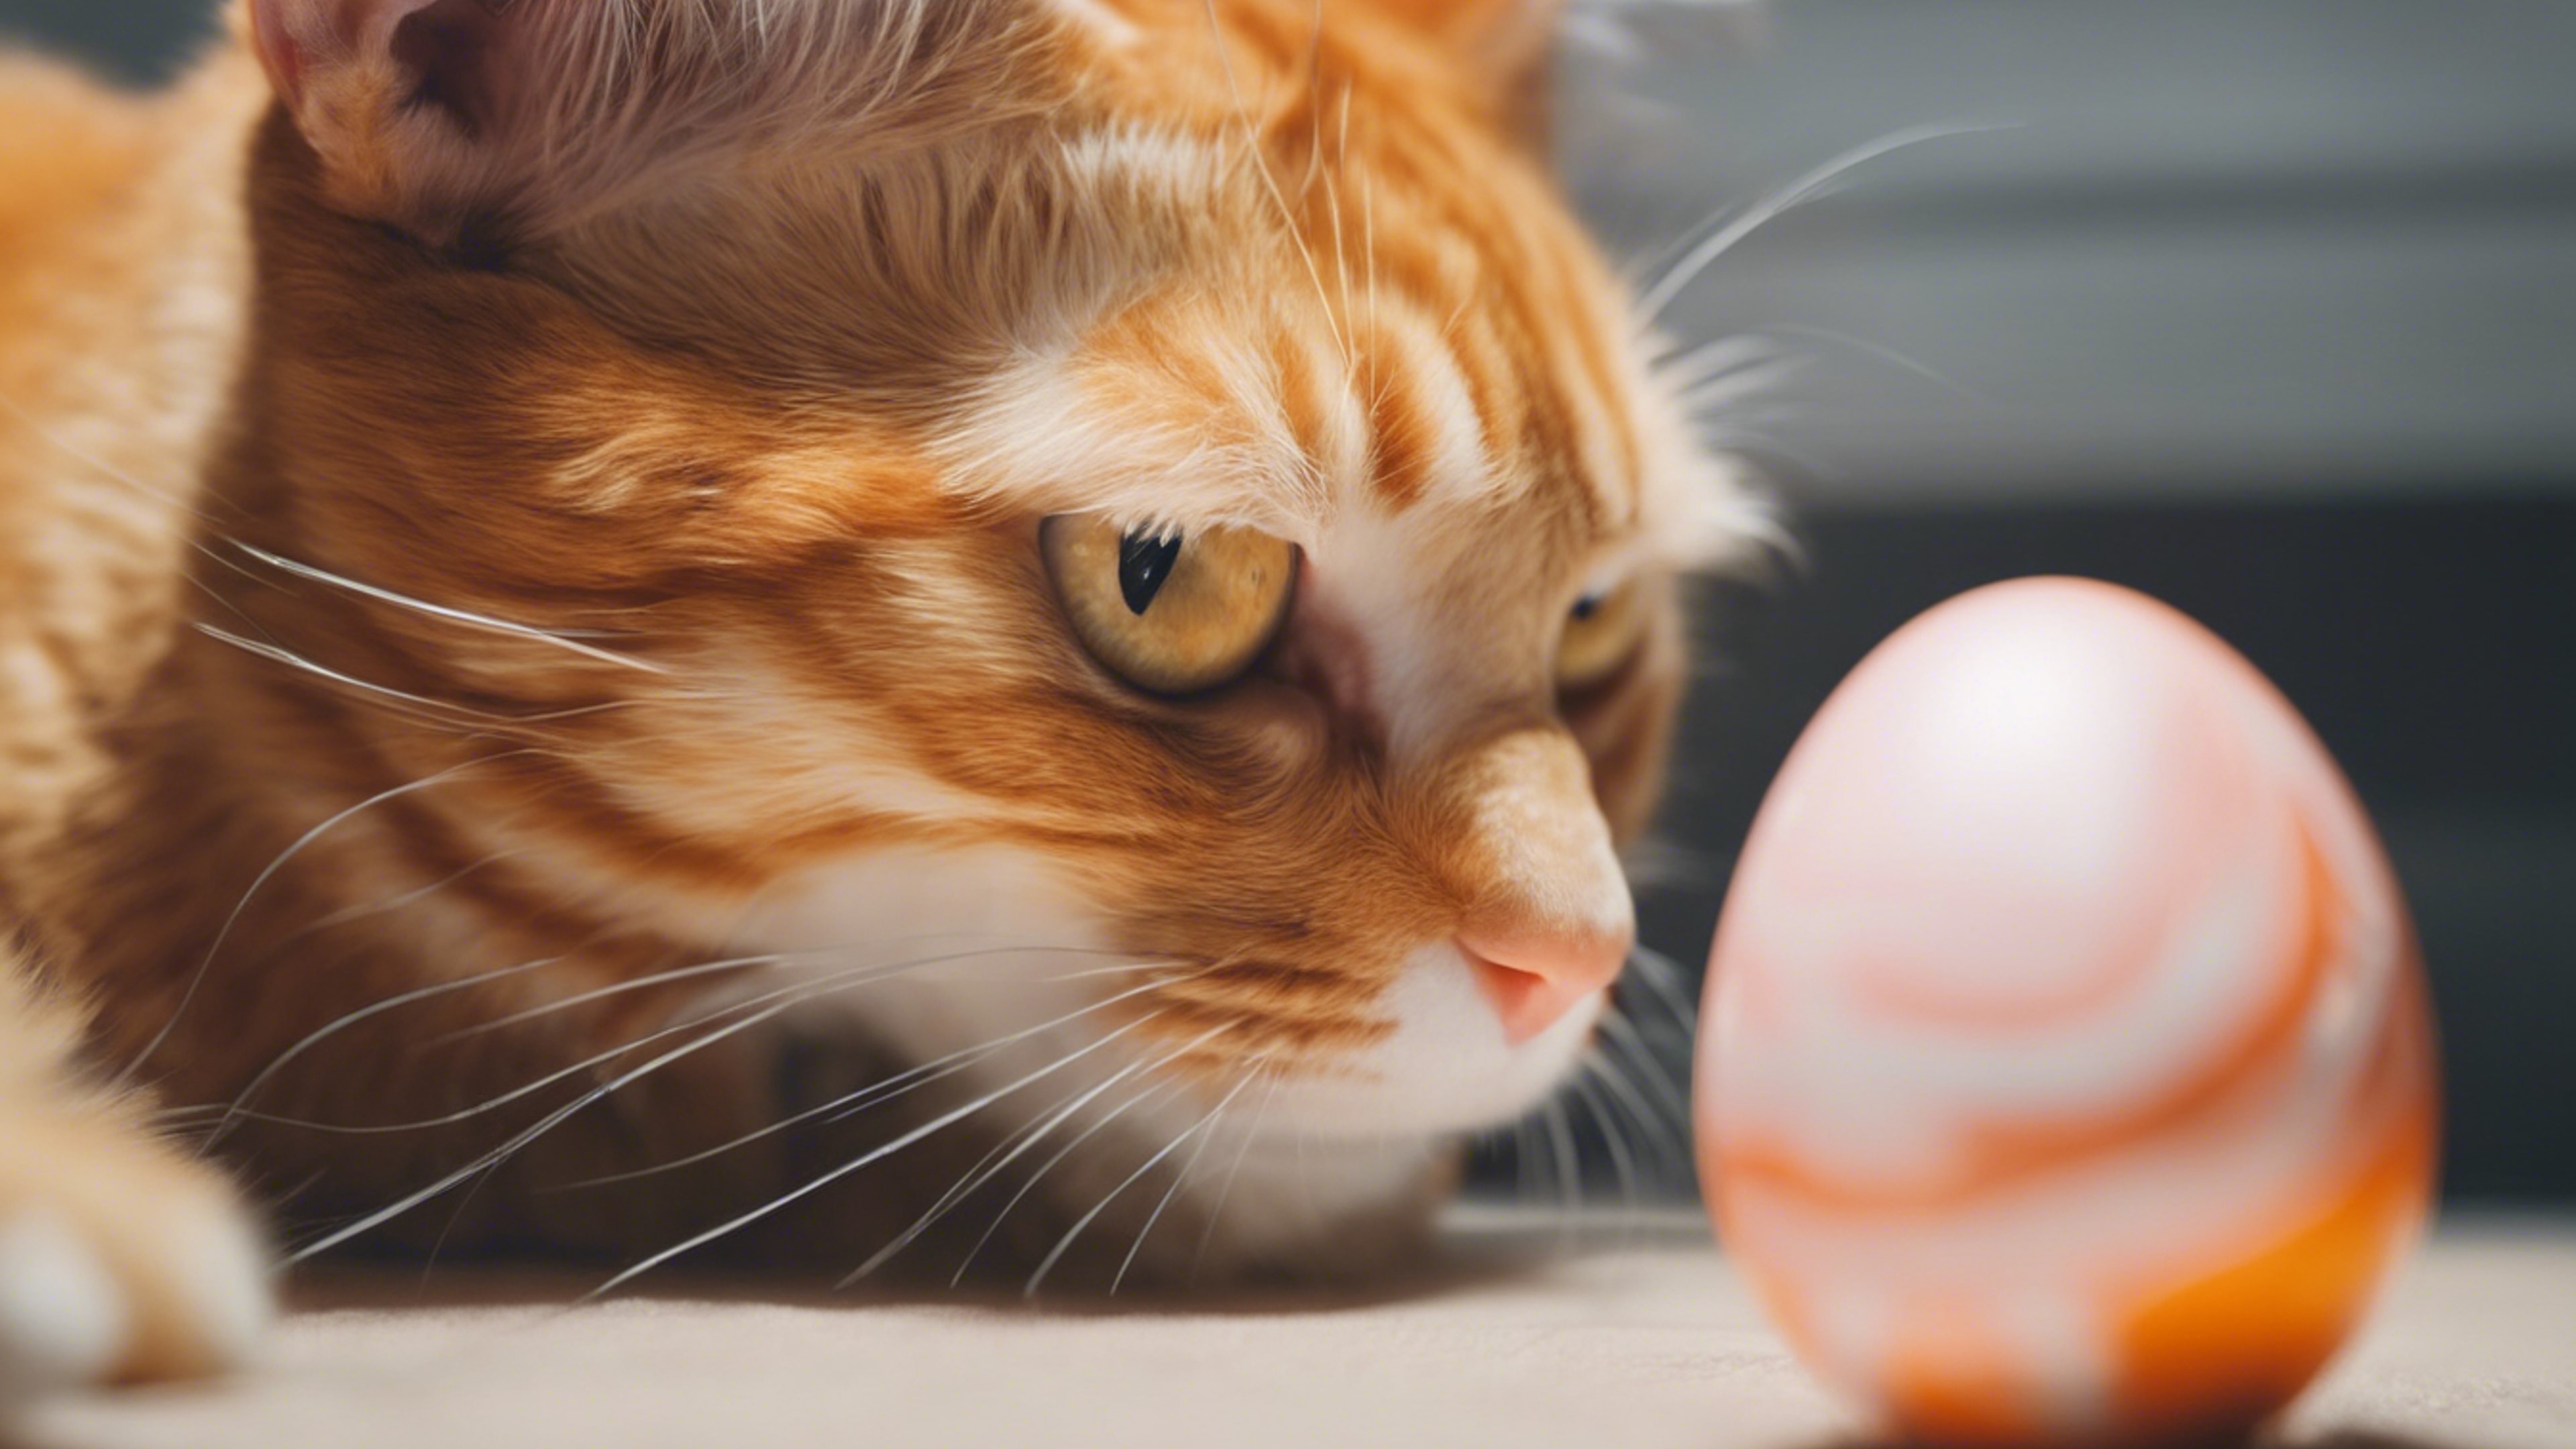 Close-up view of an orange tabby cat curiously examining a shiny Easter egg.壁紙[8ba18e697d9149748cf6]